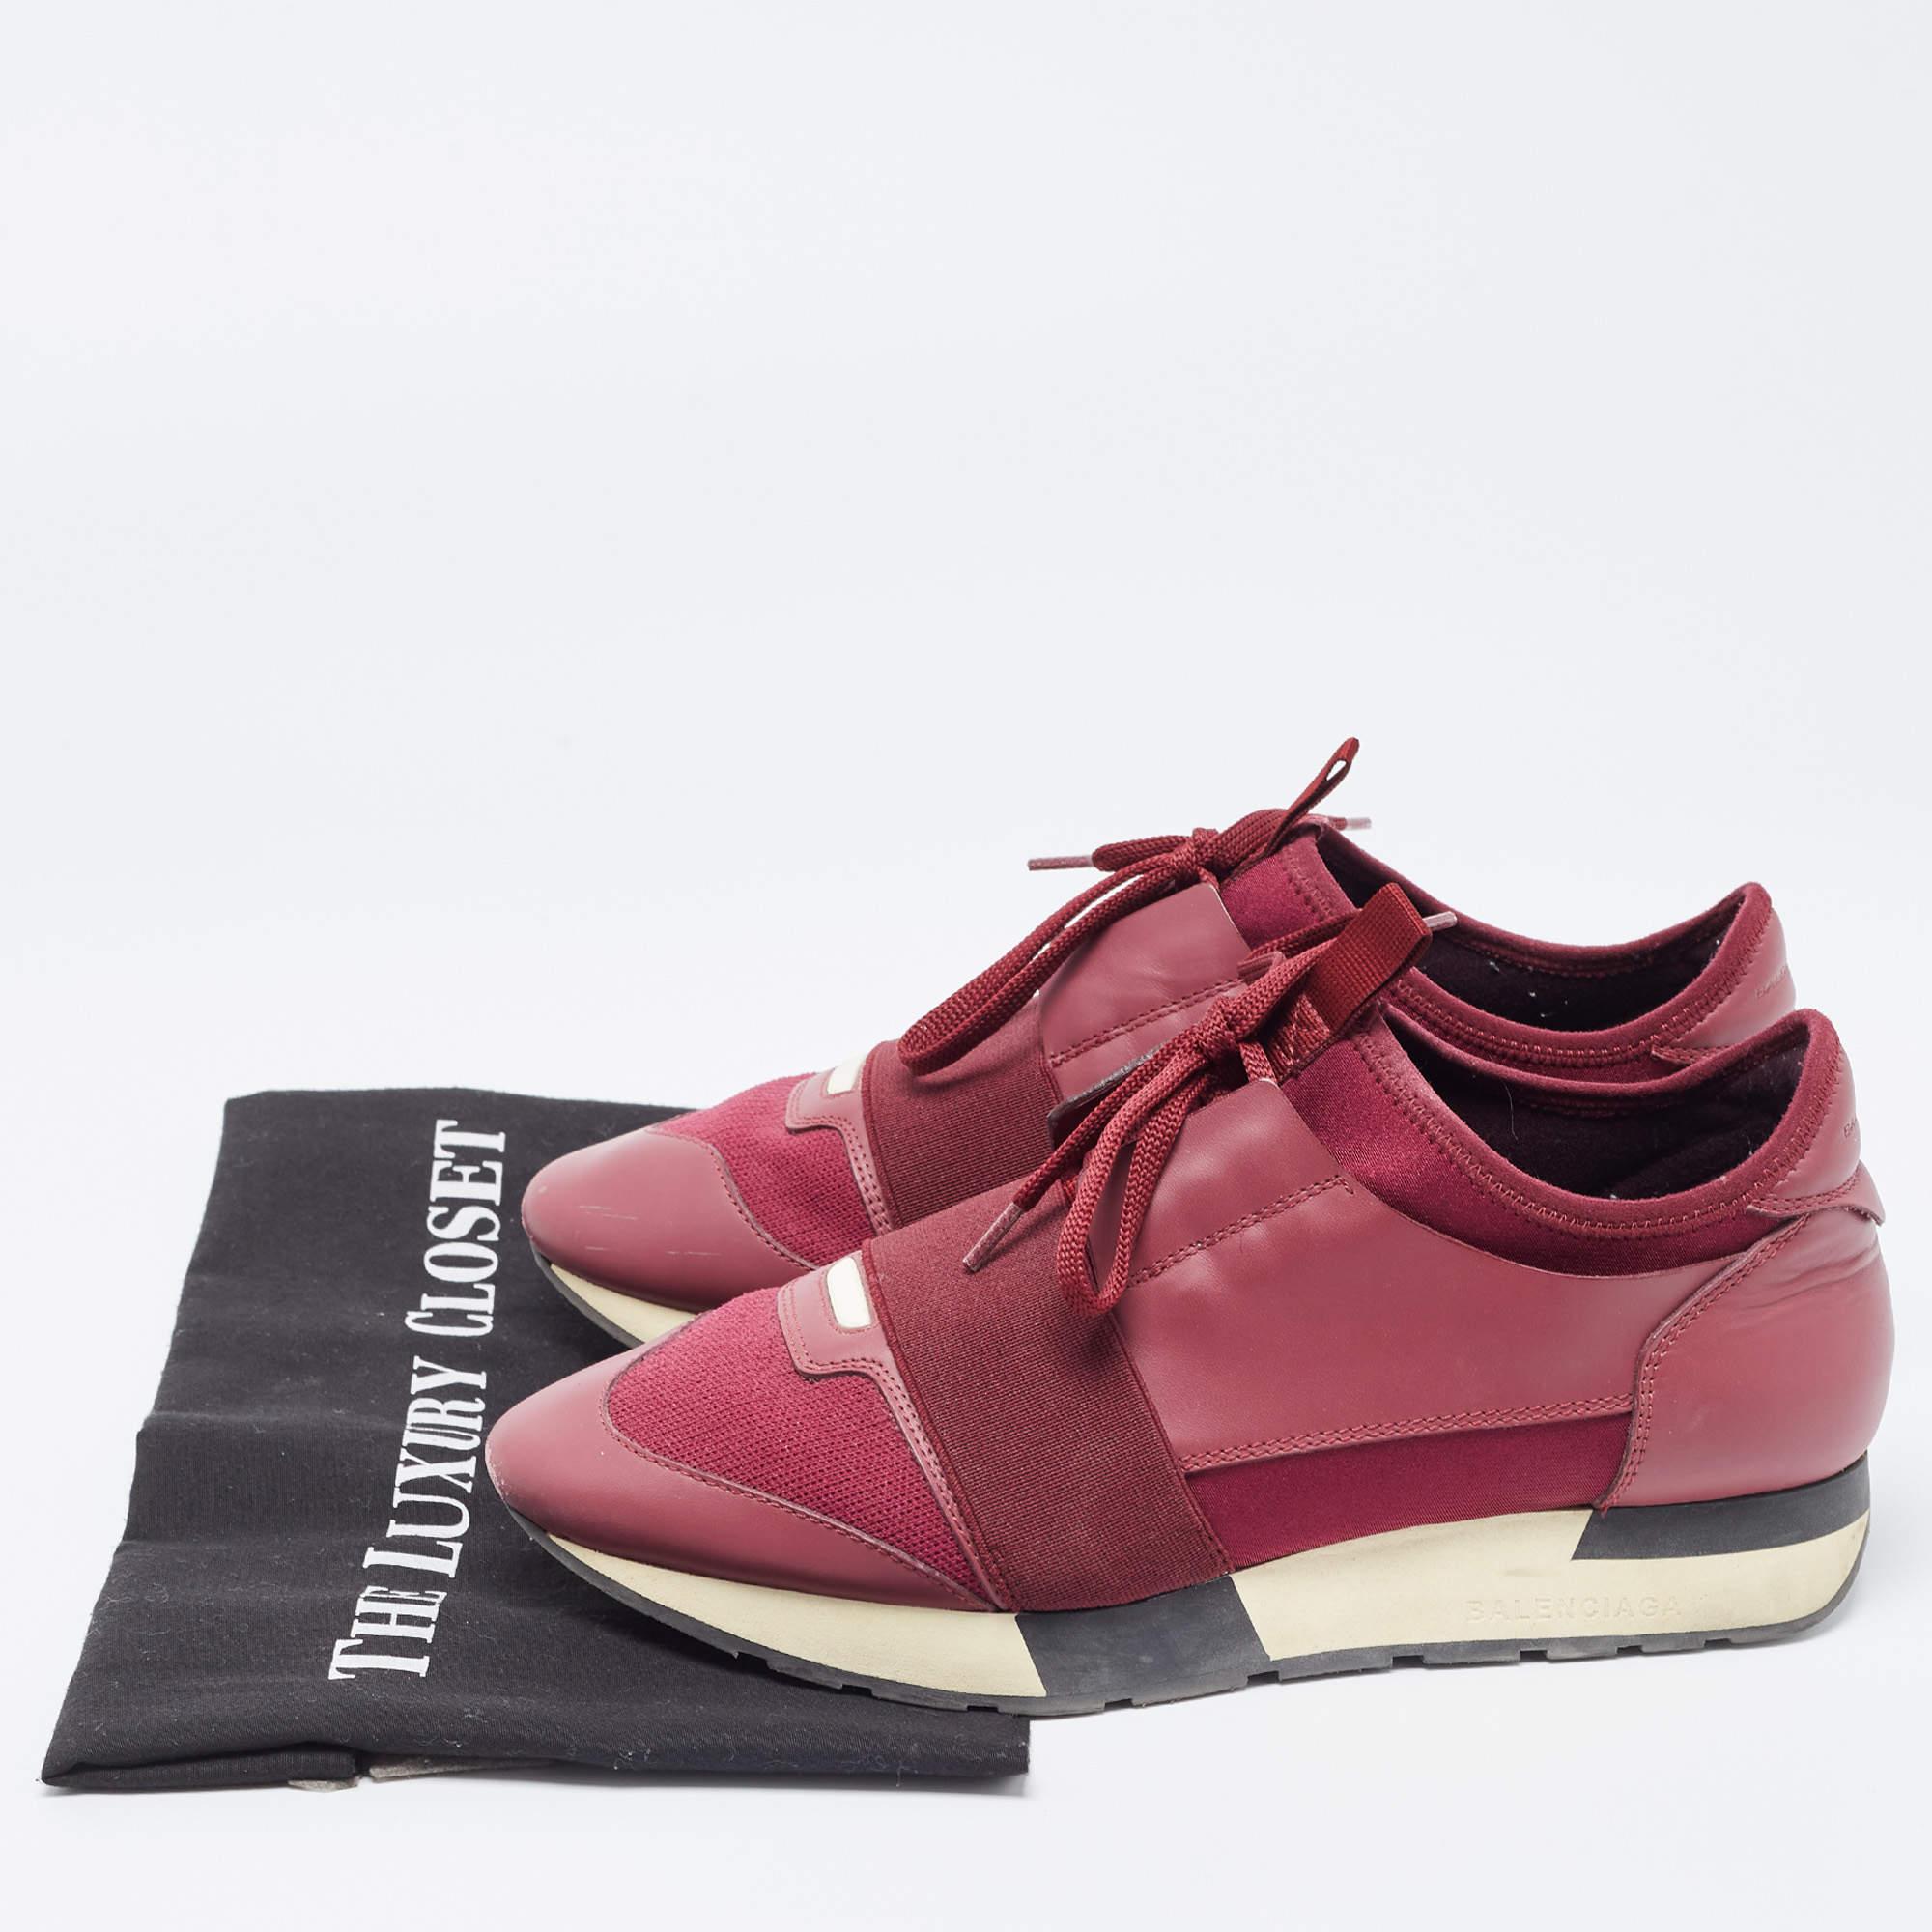 Balenciaga Burgundy Leather and Fabric Race Runner Sneakers Size 39 For Sale 4